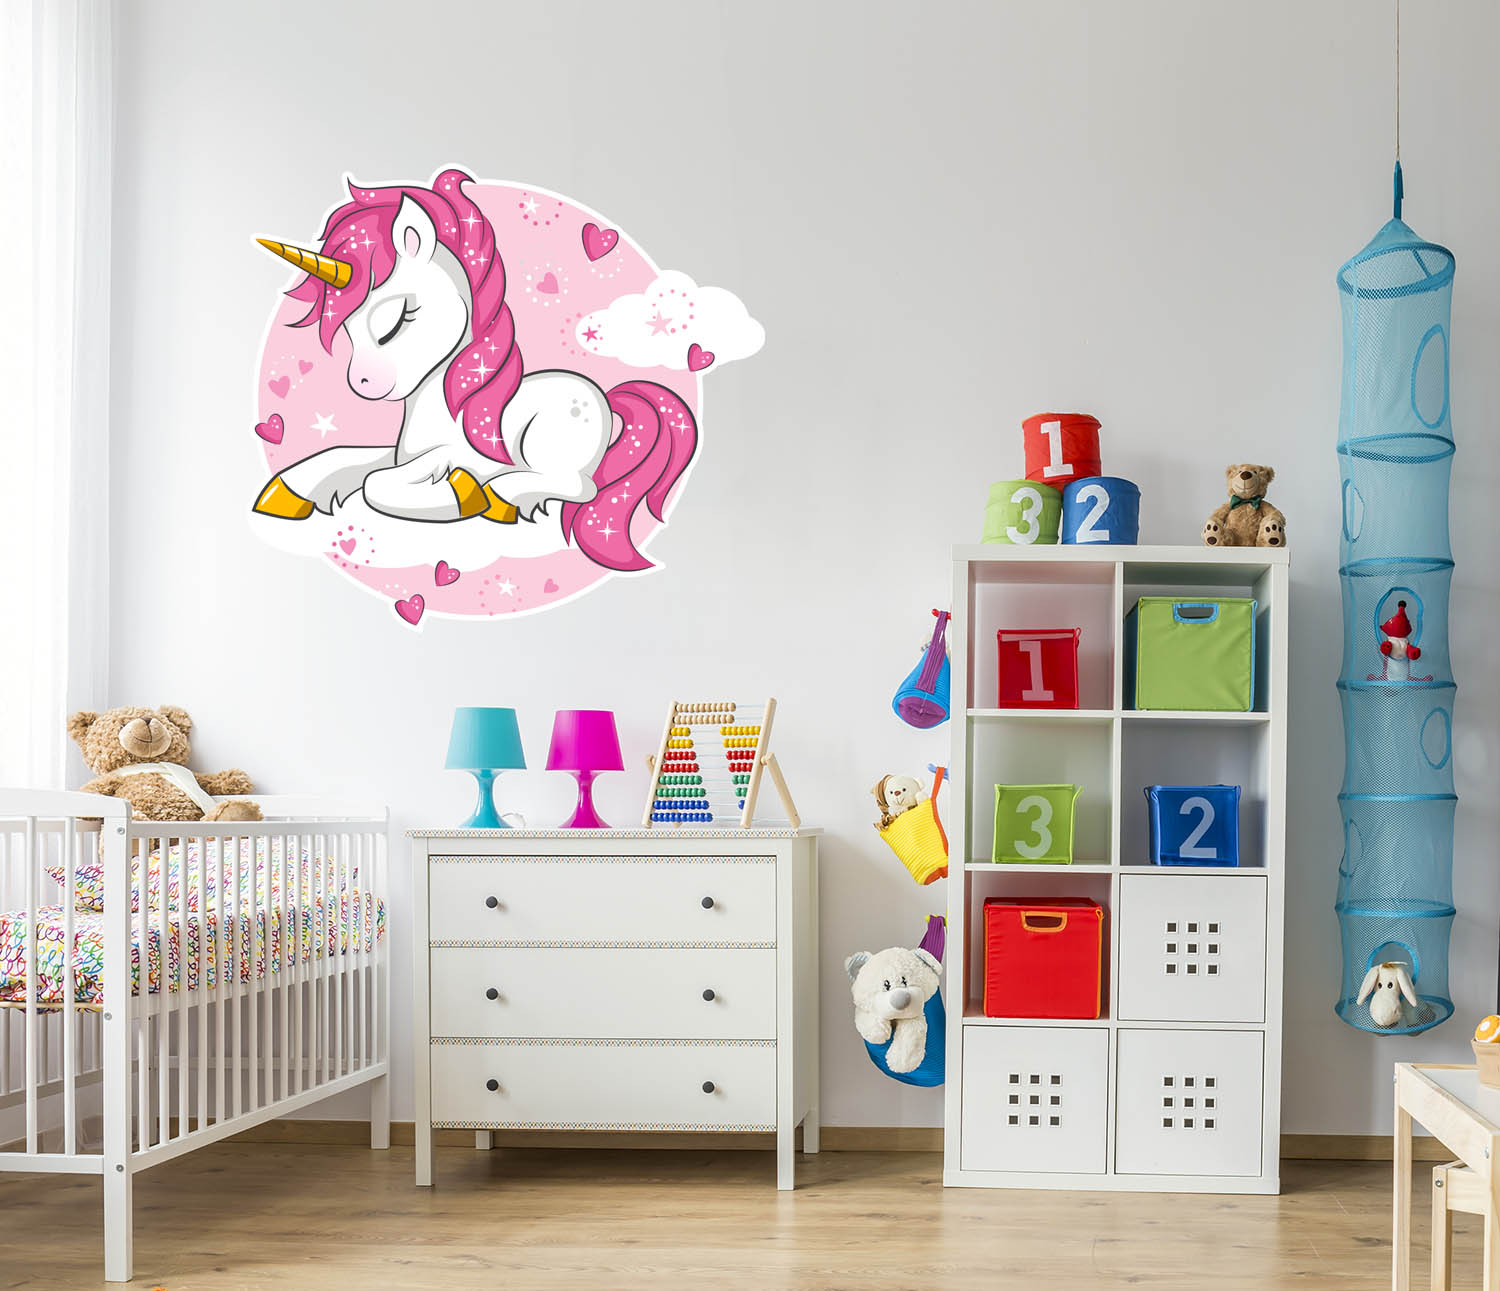 Pink Unicorn in a Cloud, Wall Decal Sticker, Removable with NO wall Damage!